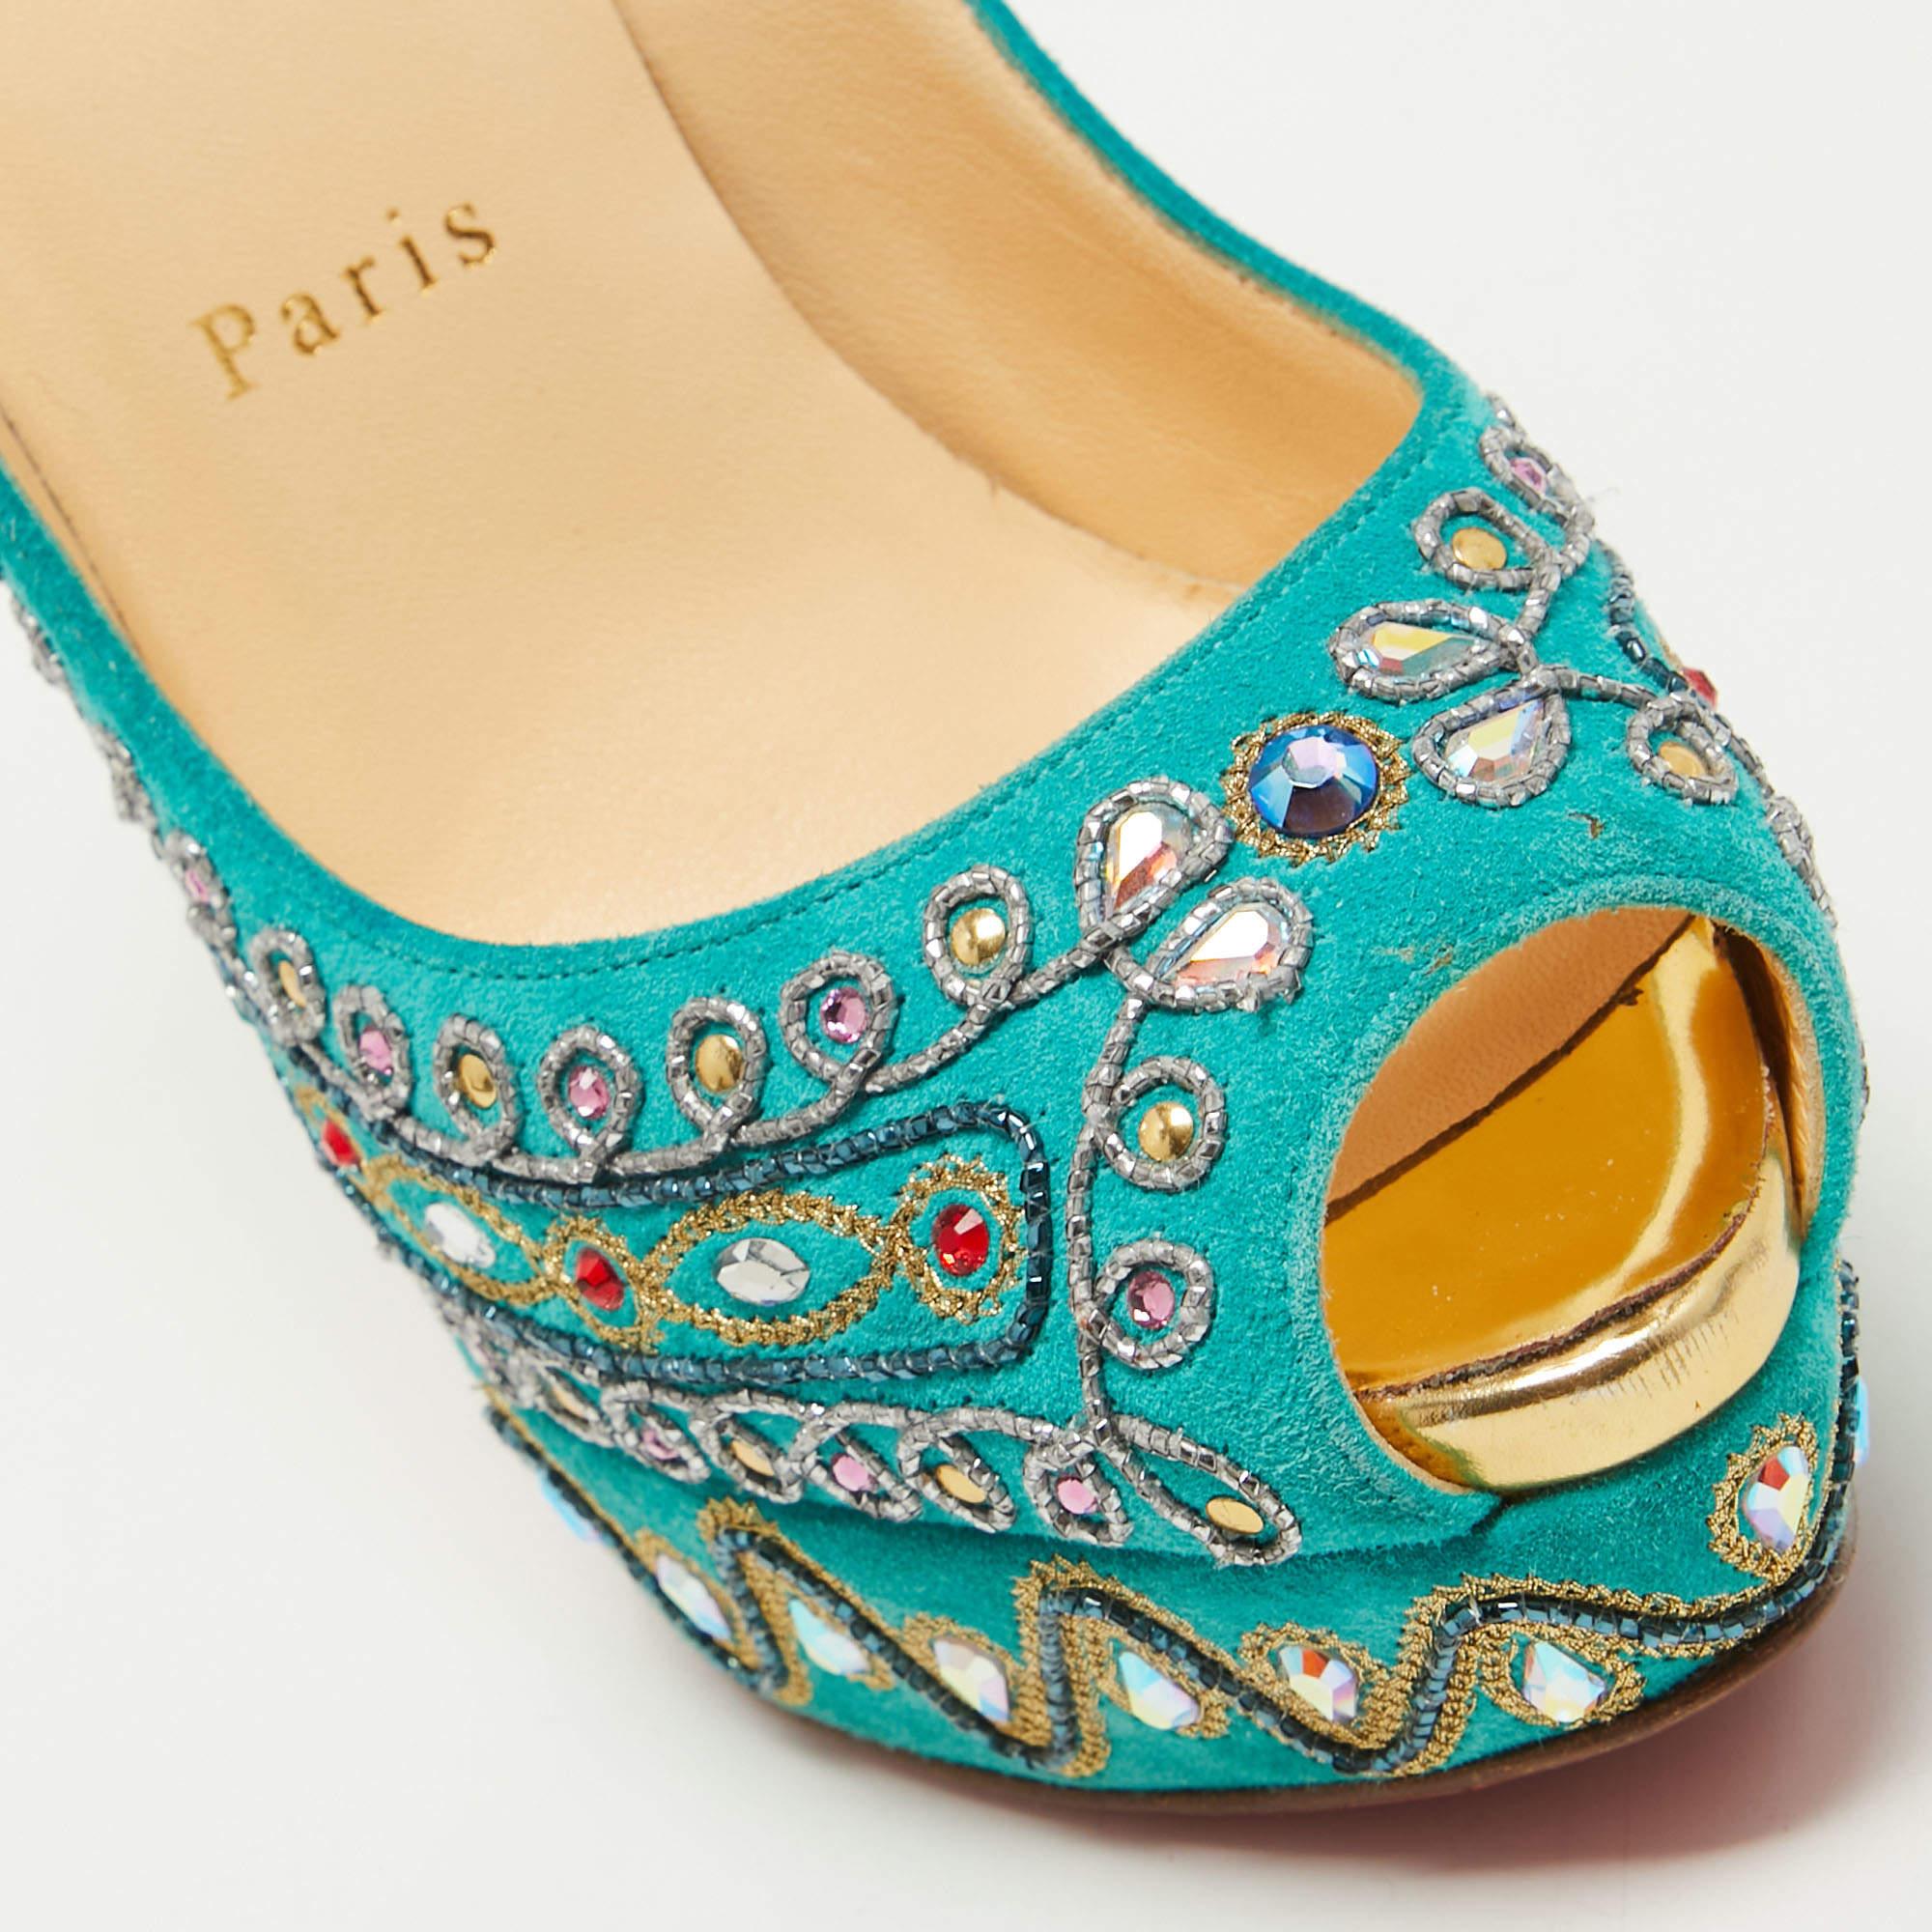 Women's Christian Louboutin Turquoise Embellished Suede Lady Peep Pumps Size 37